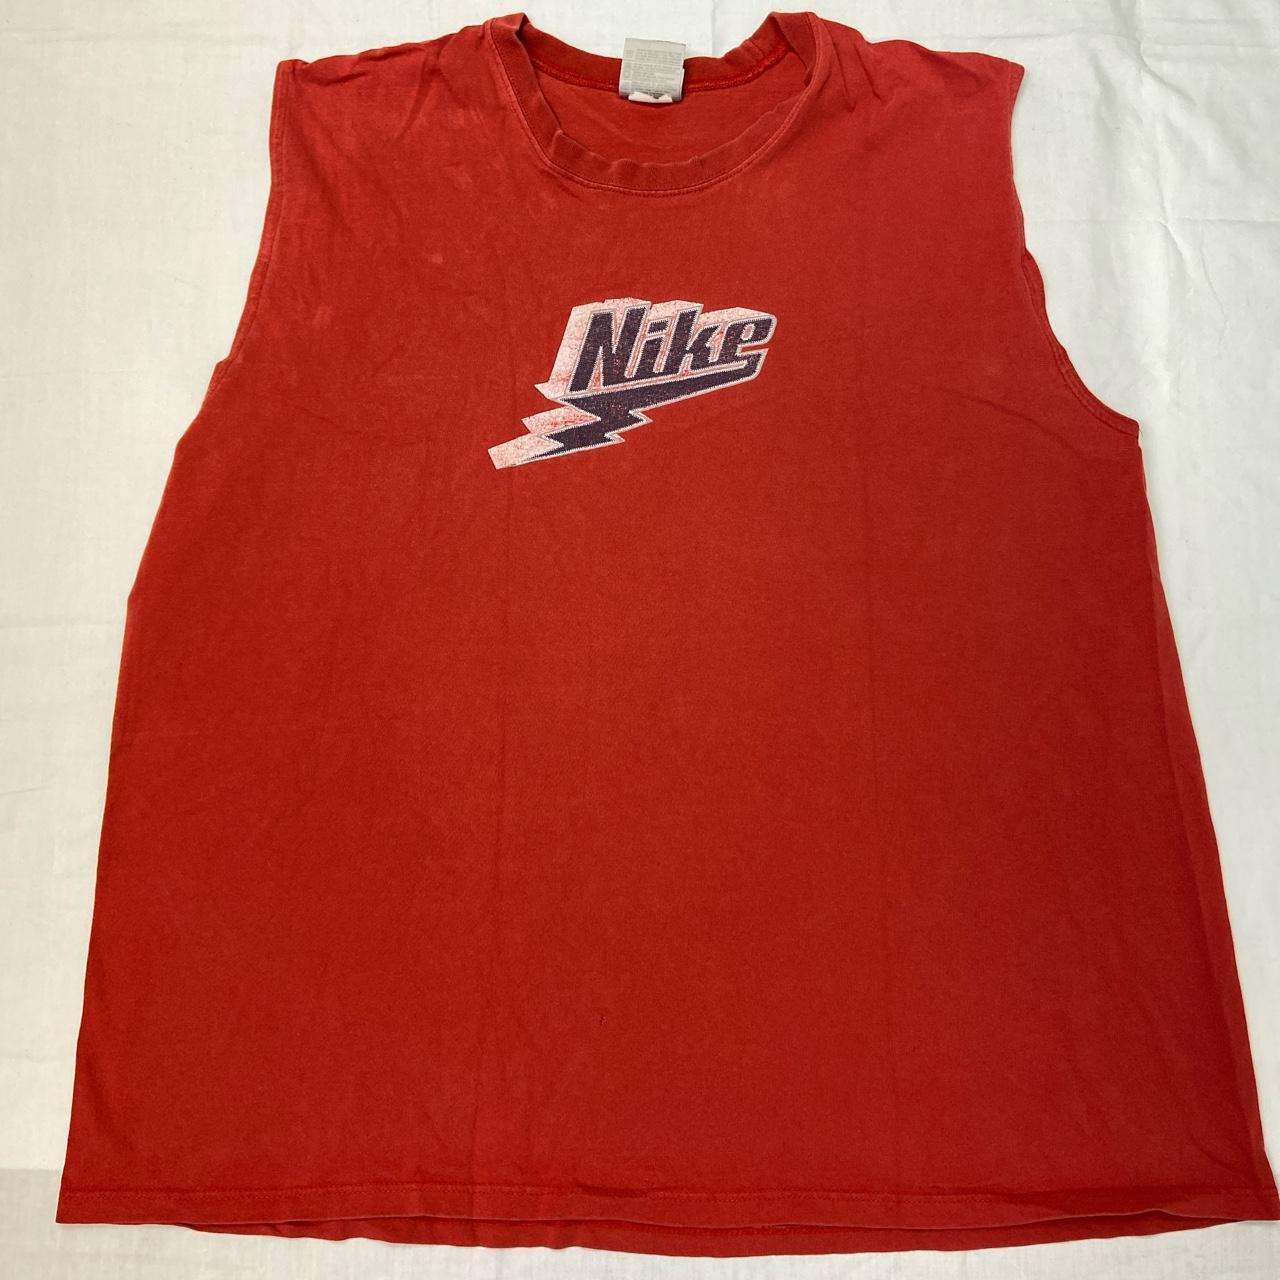 Nike Men's Red and Navy Vest (2)